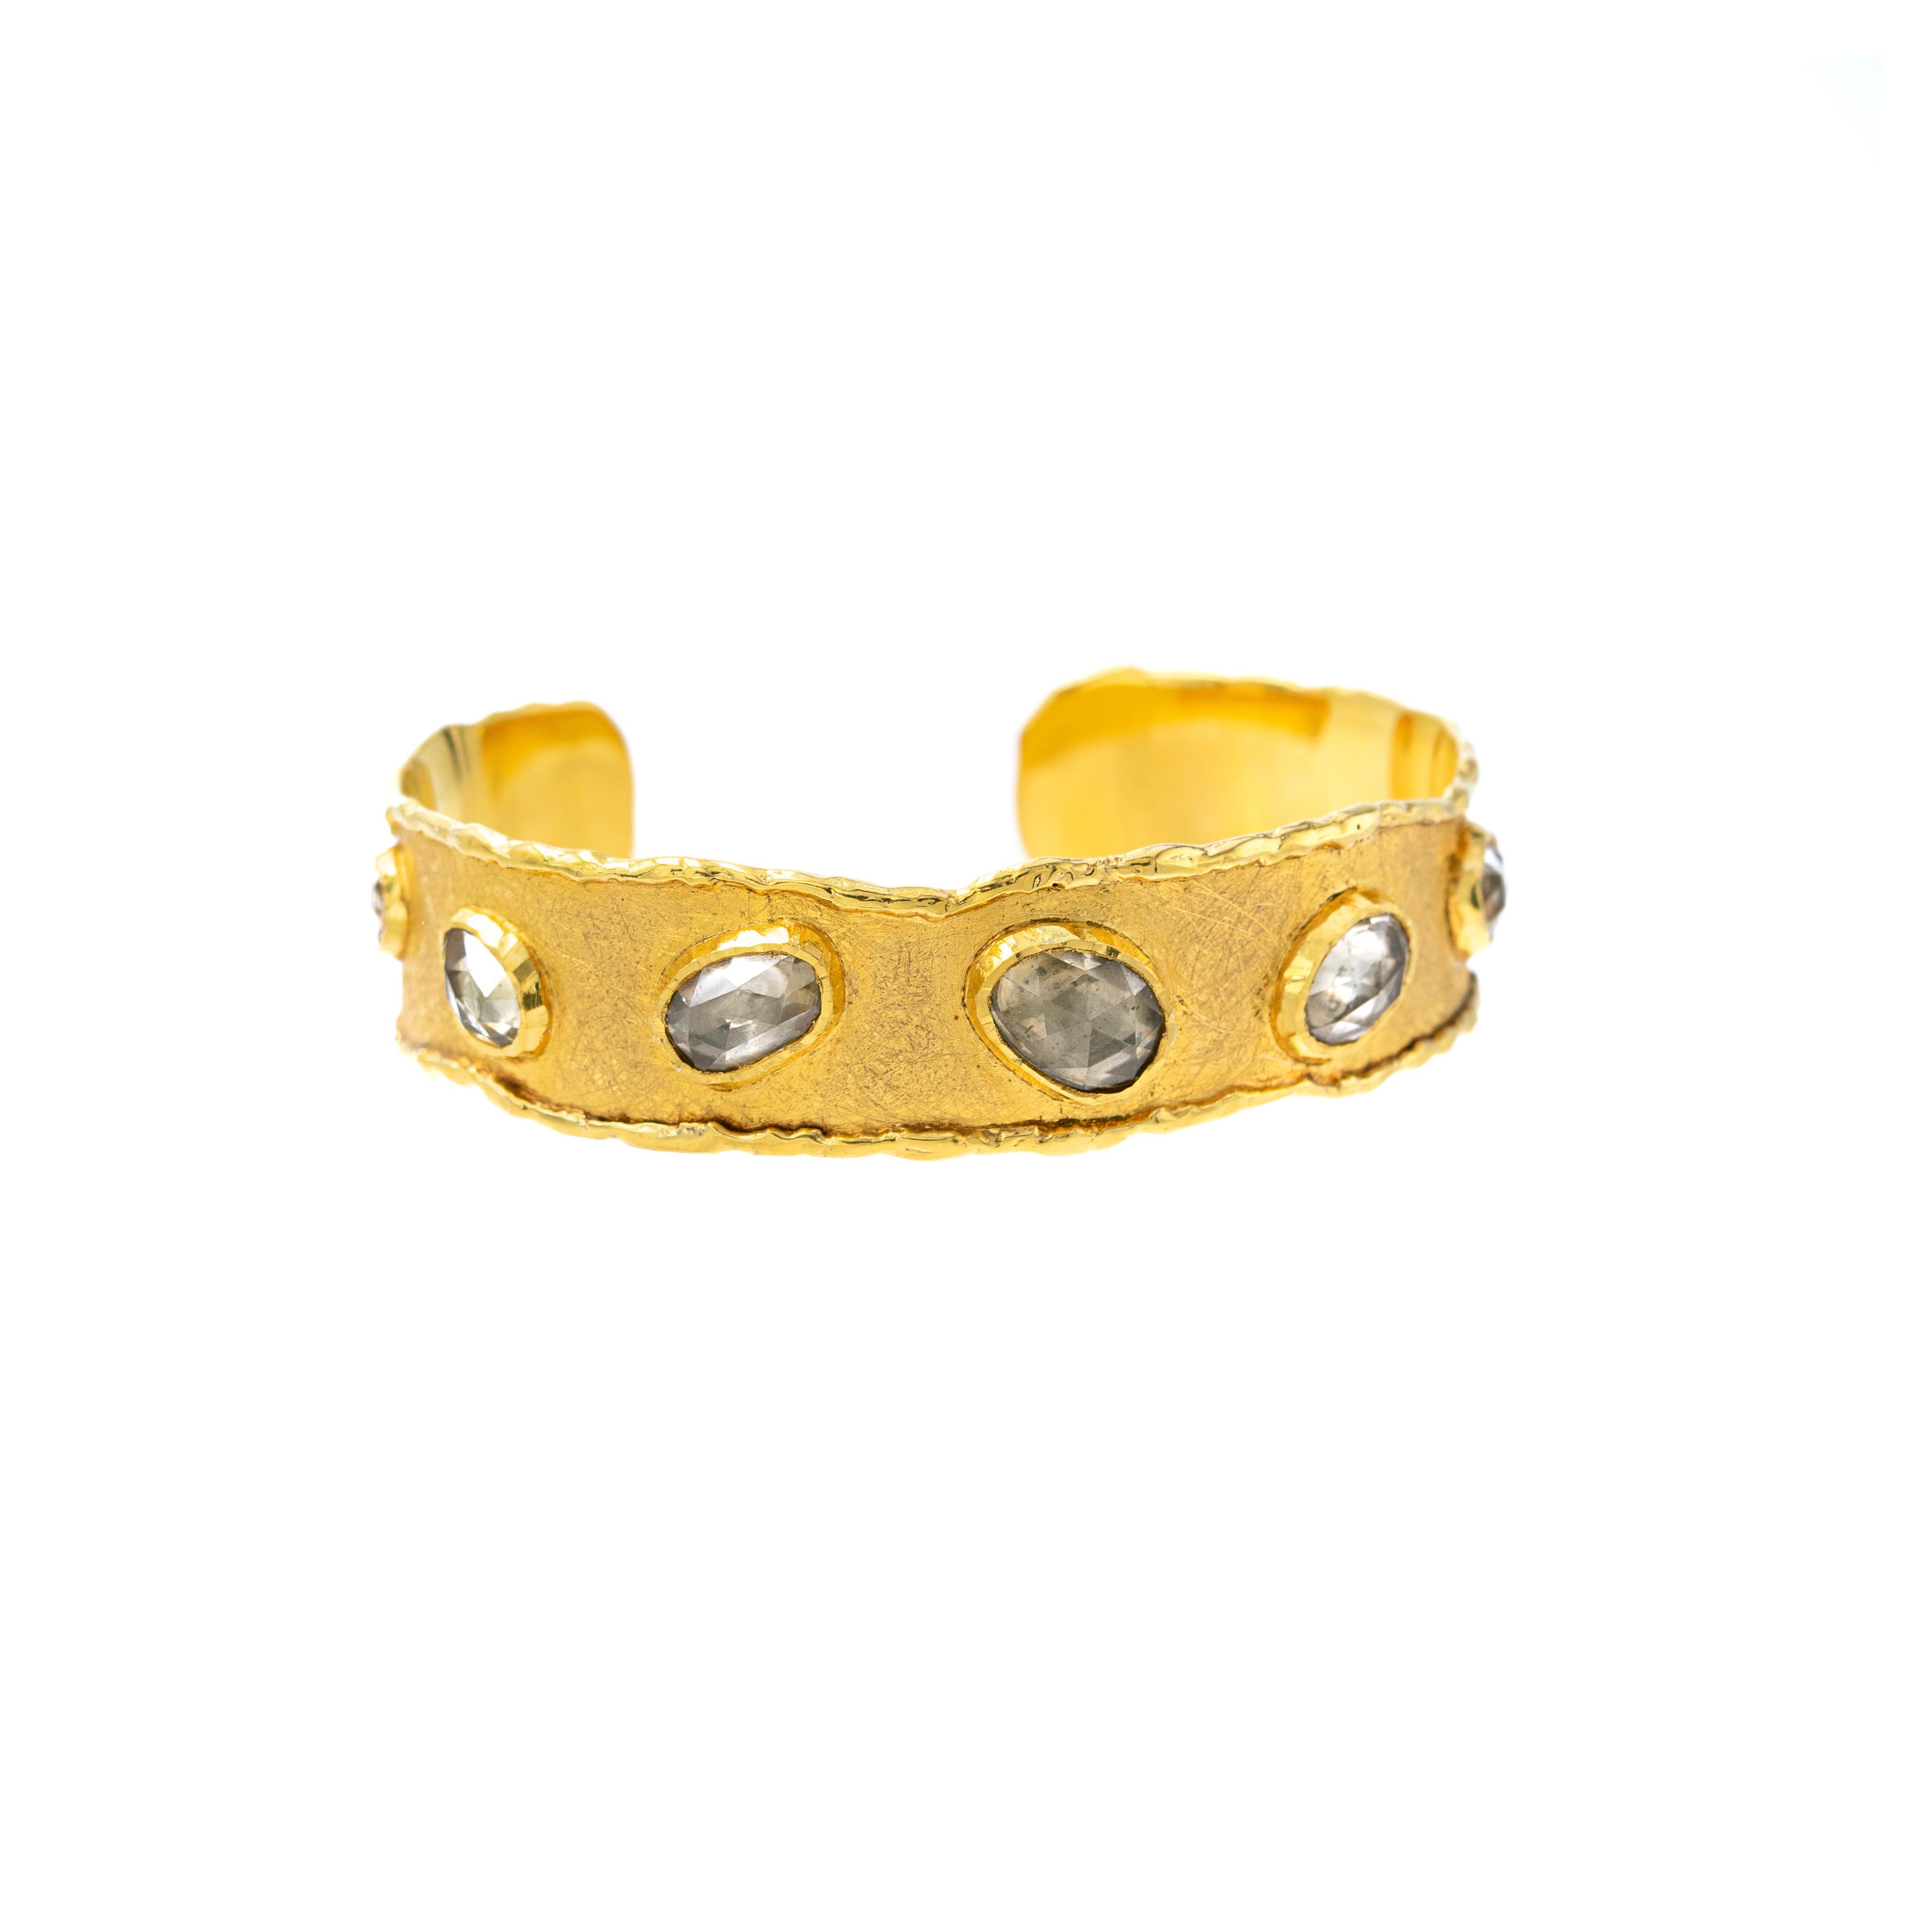 Inspired by the energy pulsating throughout nature, Velyan unites pure metals and gemstones into stunning styles that display the grandeur of fine jewelry.

This cuff bracelet features zircon stones set in 18k and 24k yellow gold.

Details:
Zircon